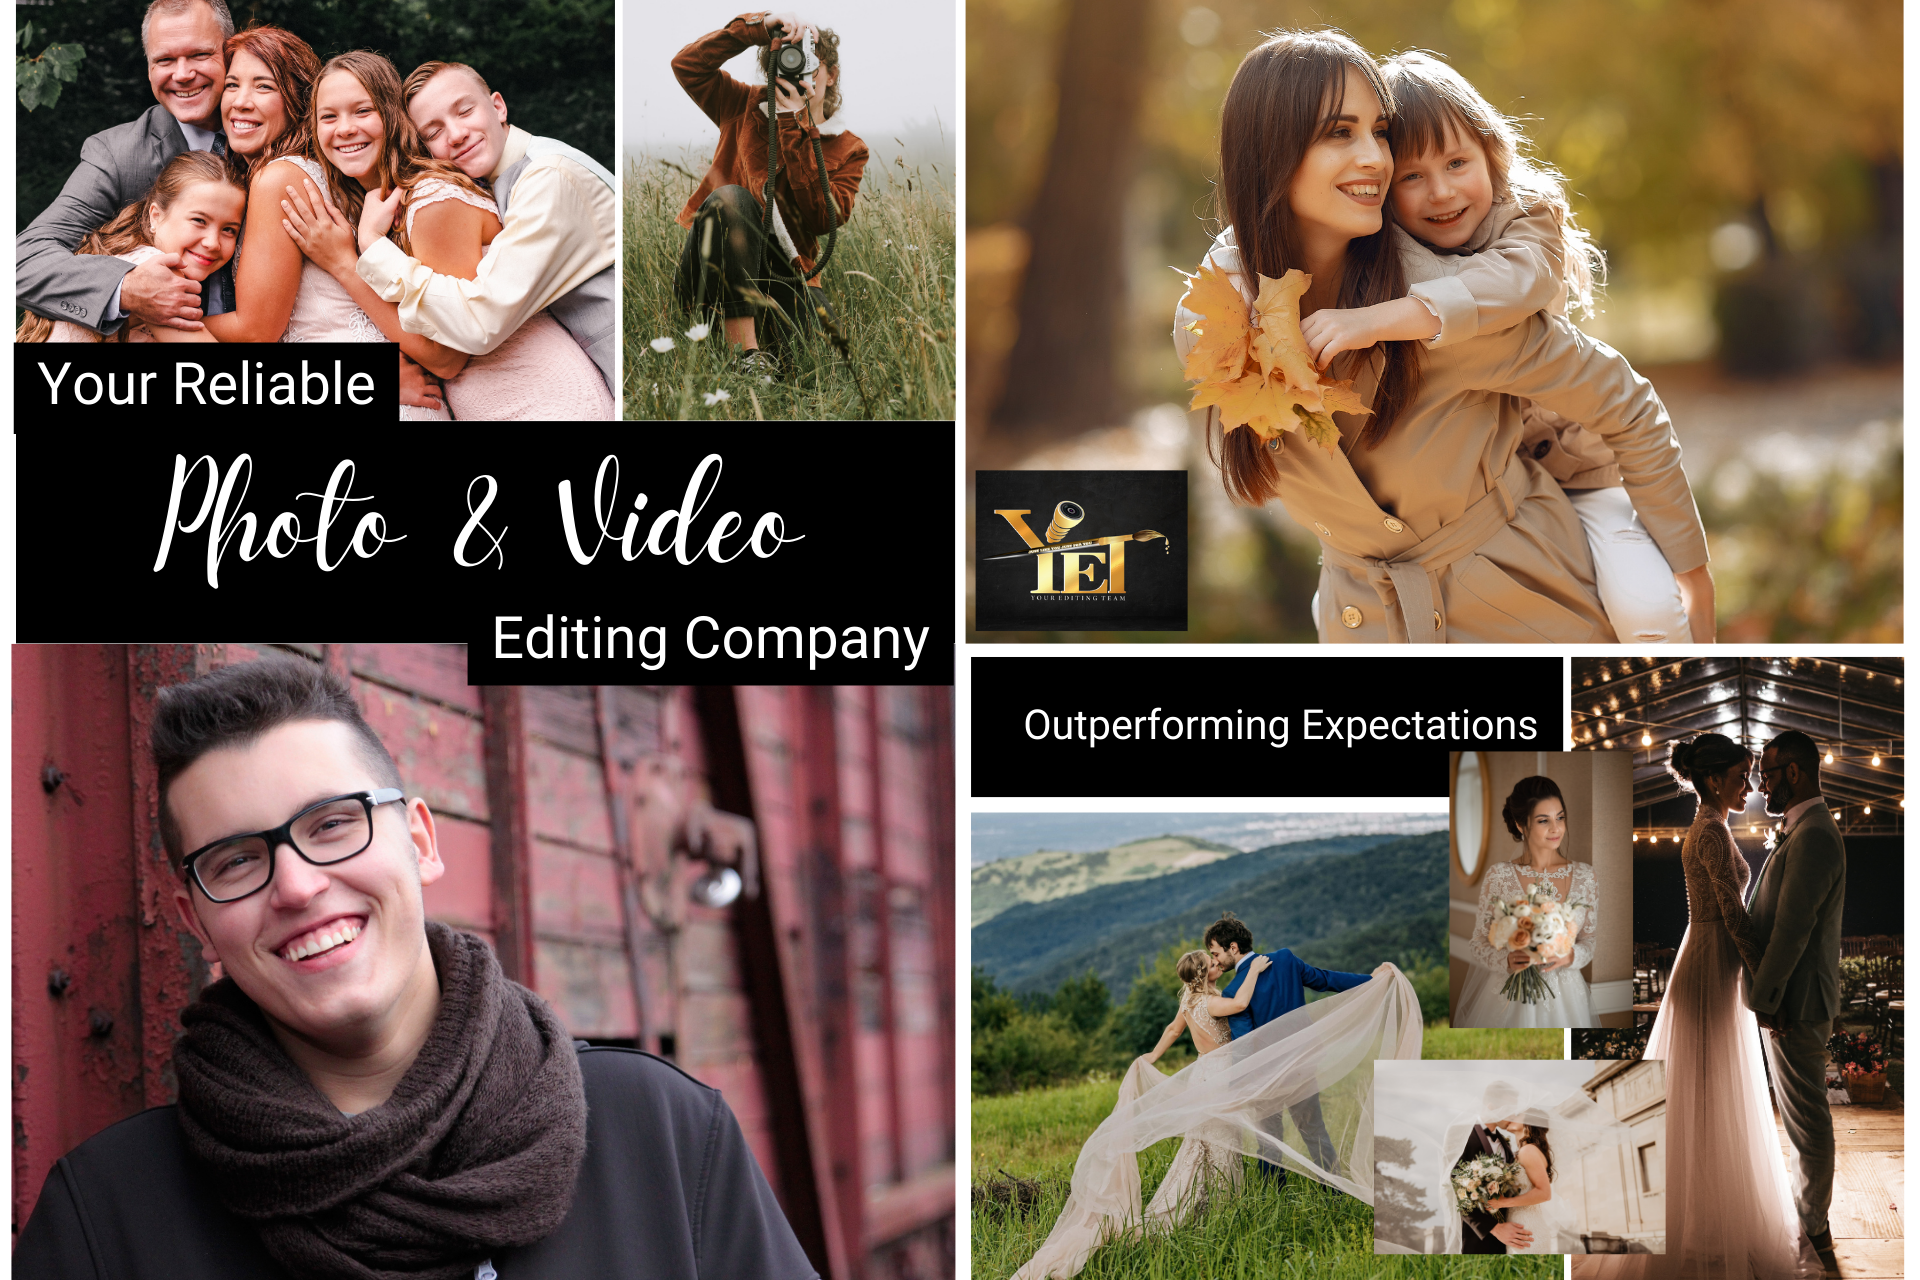 Exceeding Expectations: Your Trusted Photo & Video Editing Partner